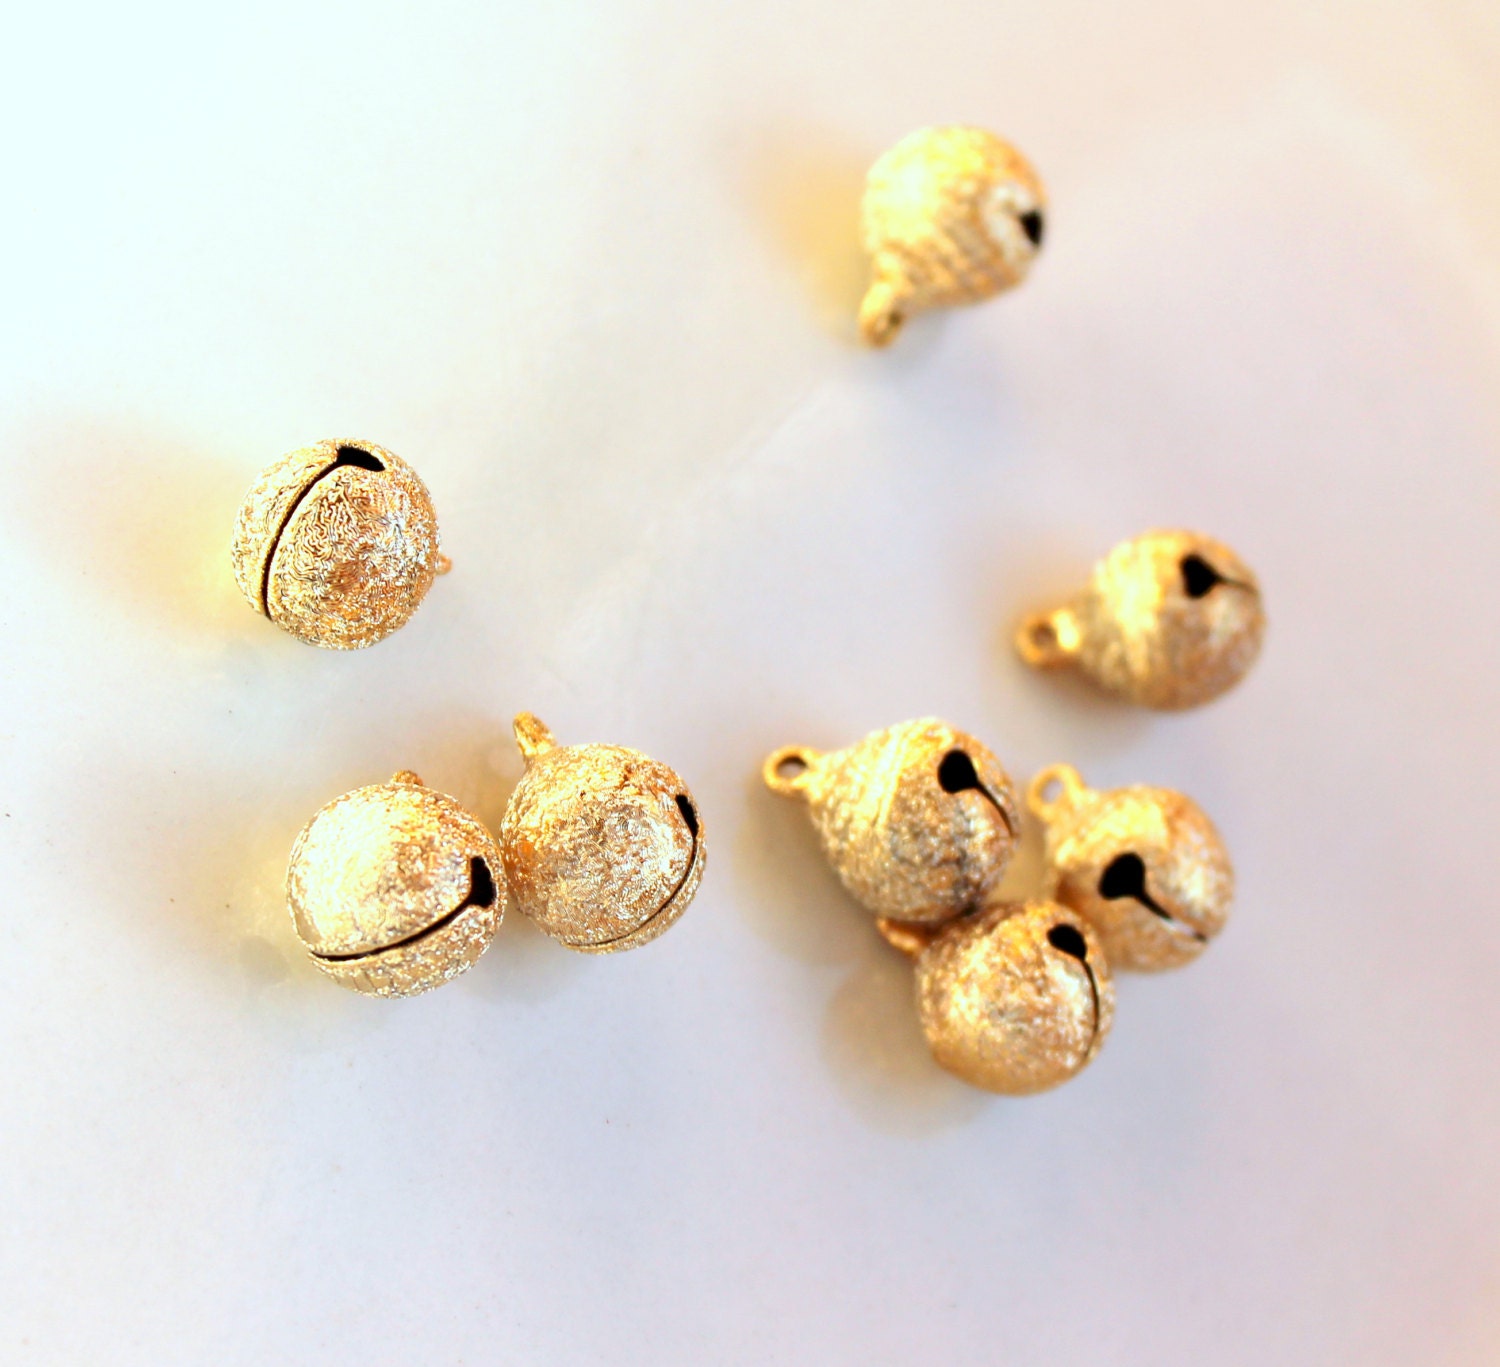 gold bells / gold stardust brass bells or pendants / 3 (three) gold bells 12mm / decorative chimes / jewelry crafting making supplies